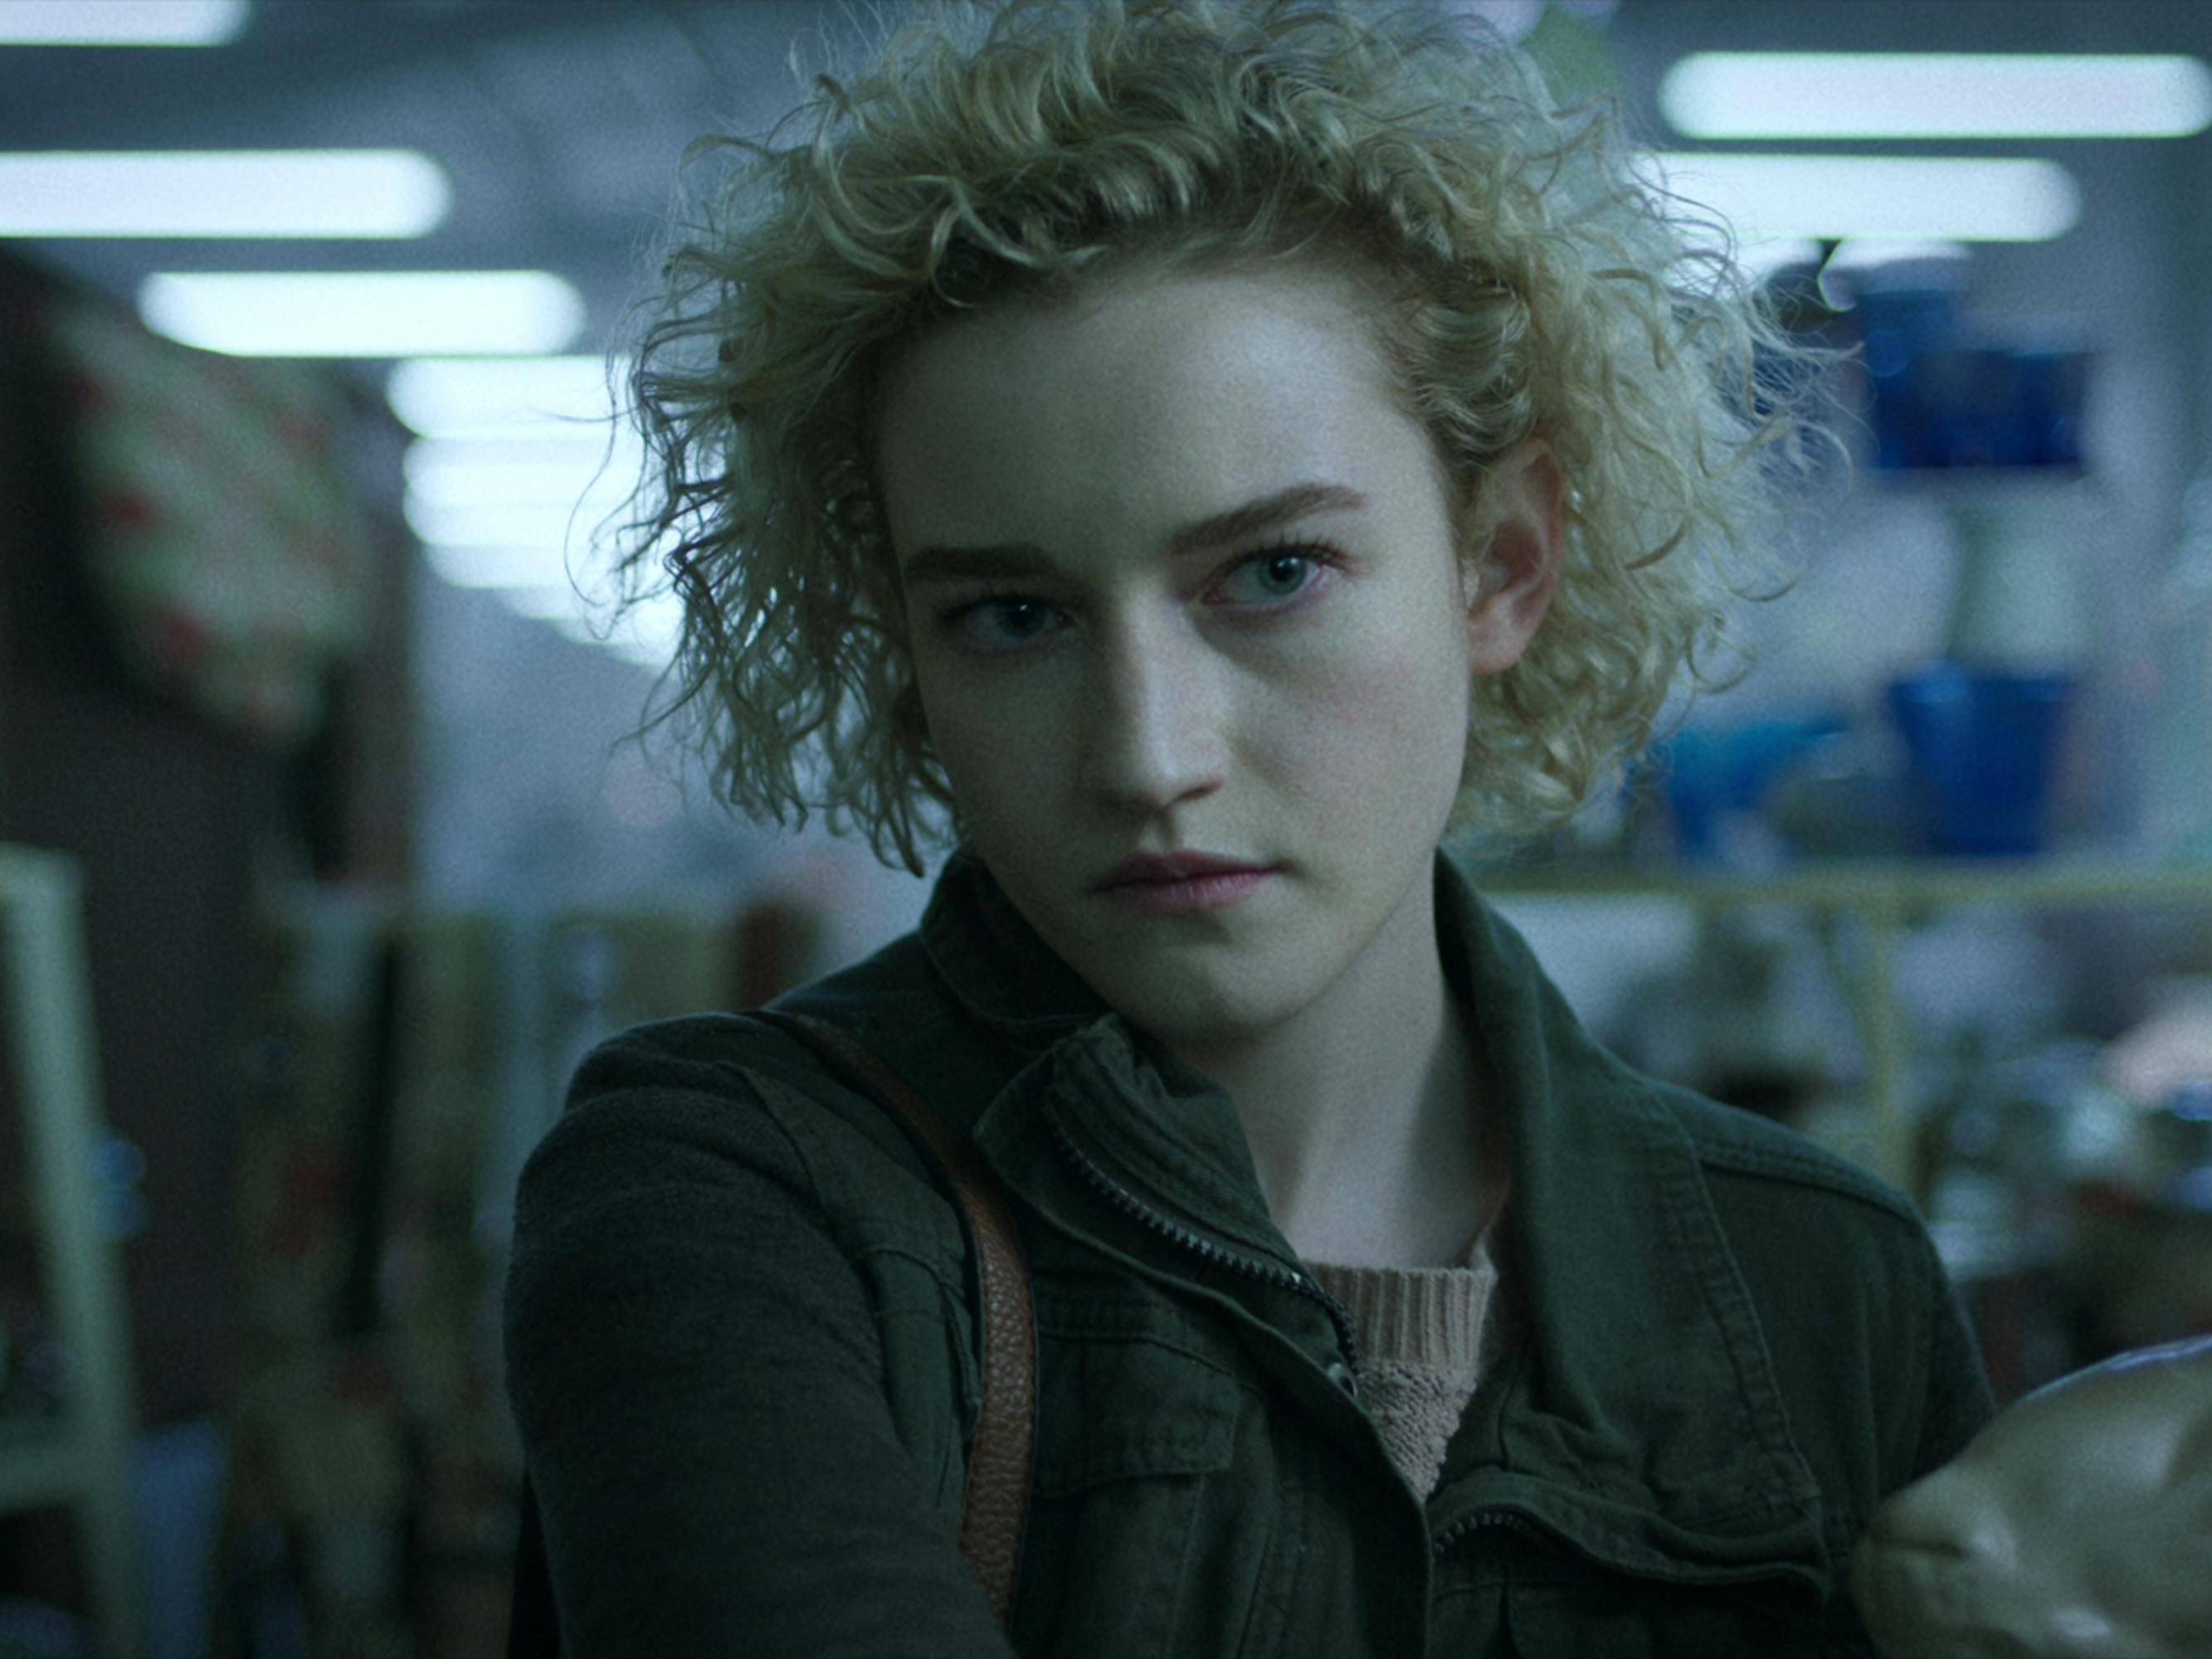 Julia Garner has curly blond hair and wears a green jacket.